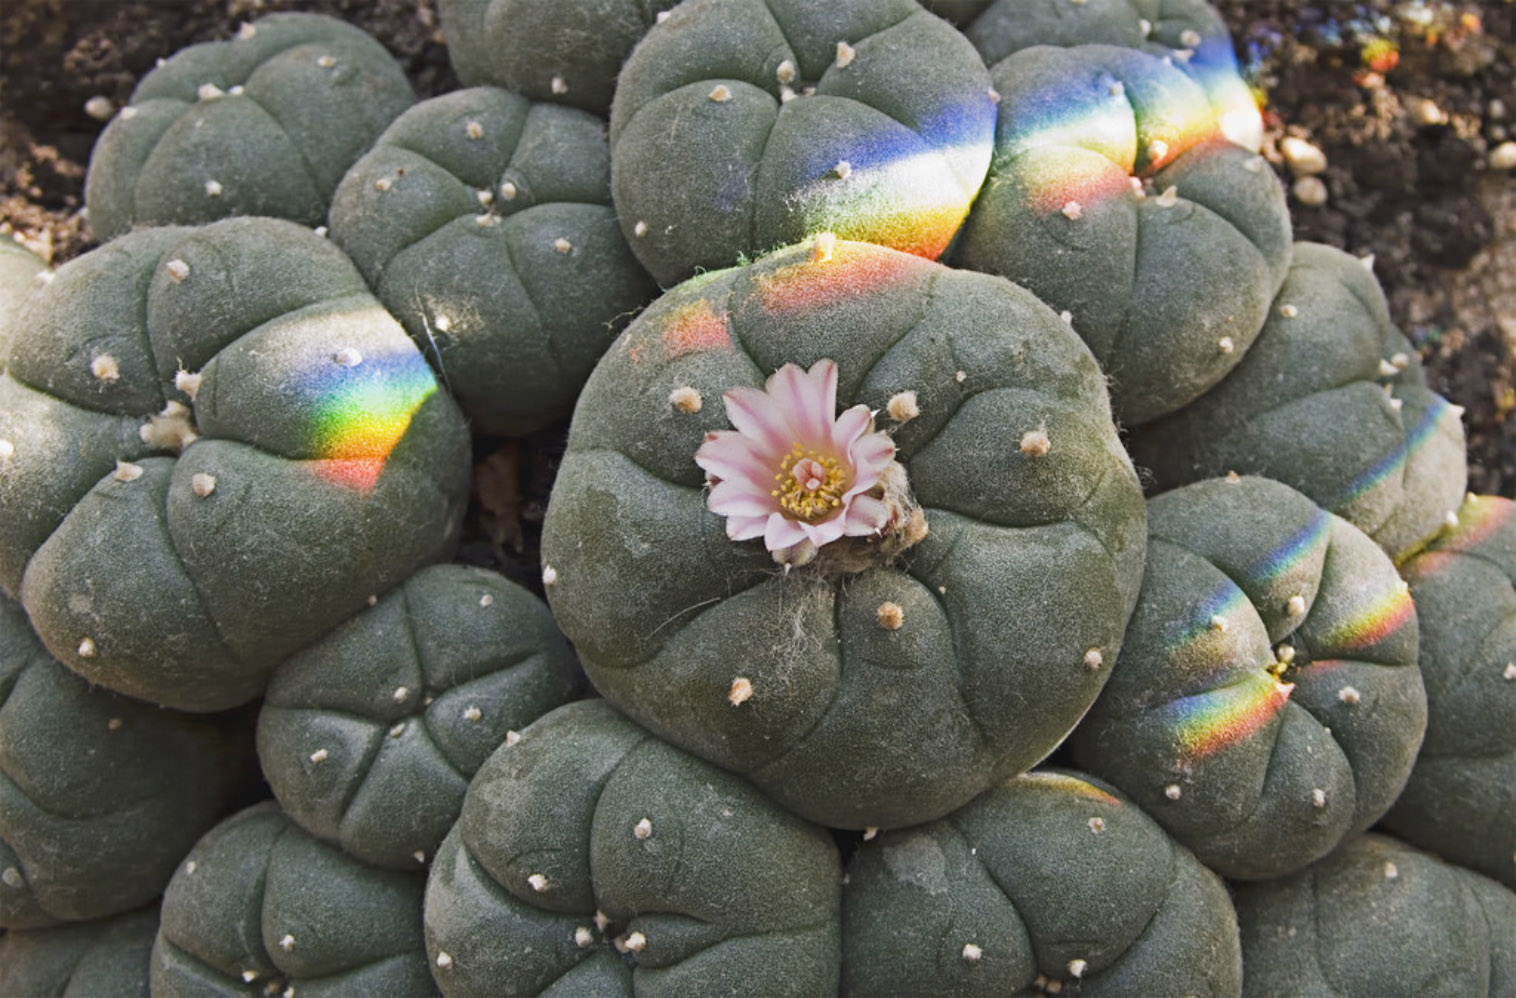 Texas Christian University lecturer Lisa Barnett has studied the implications of peyote use in certain Native American religious ceremonies.